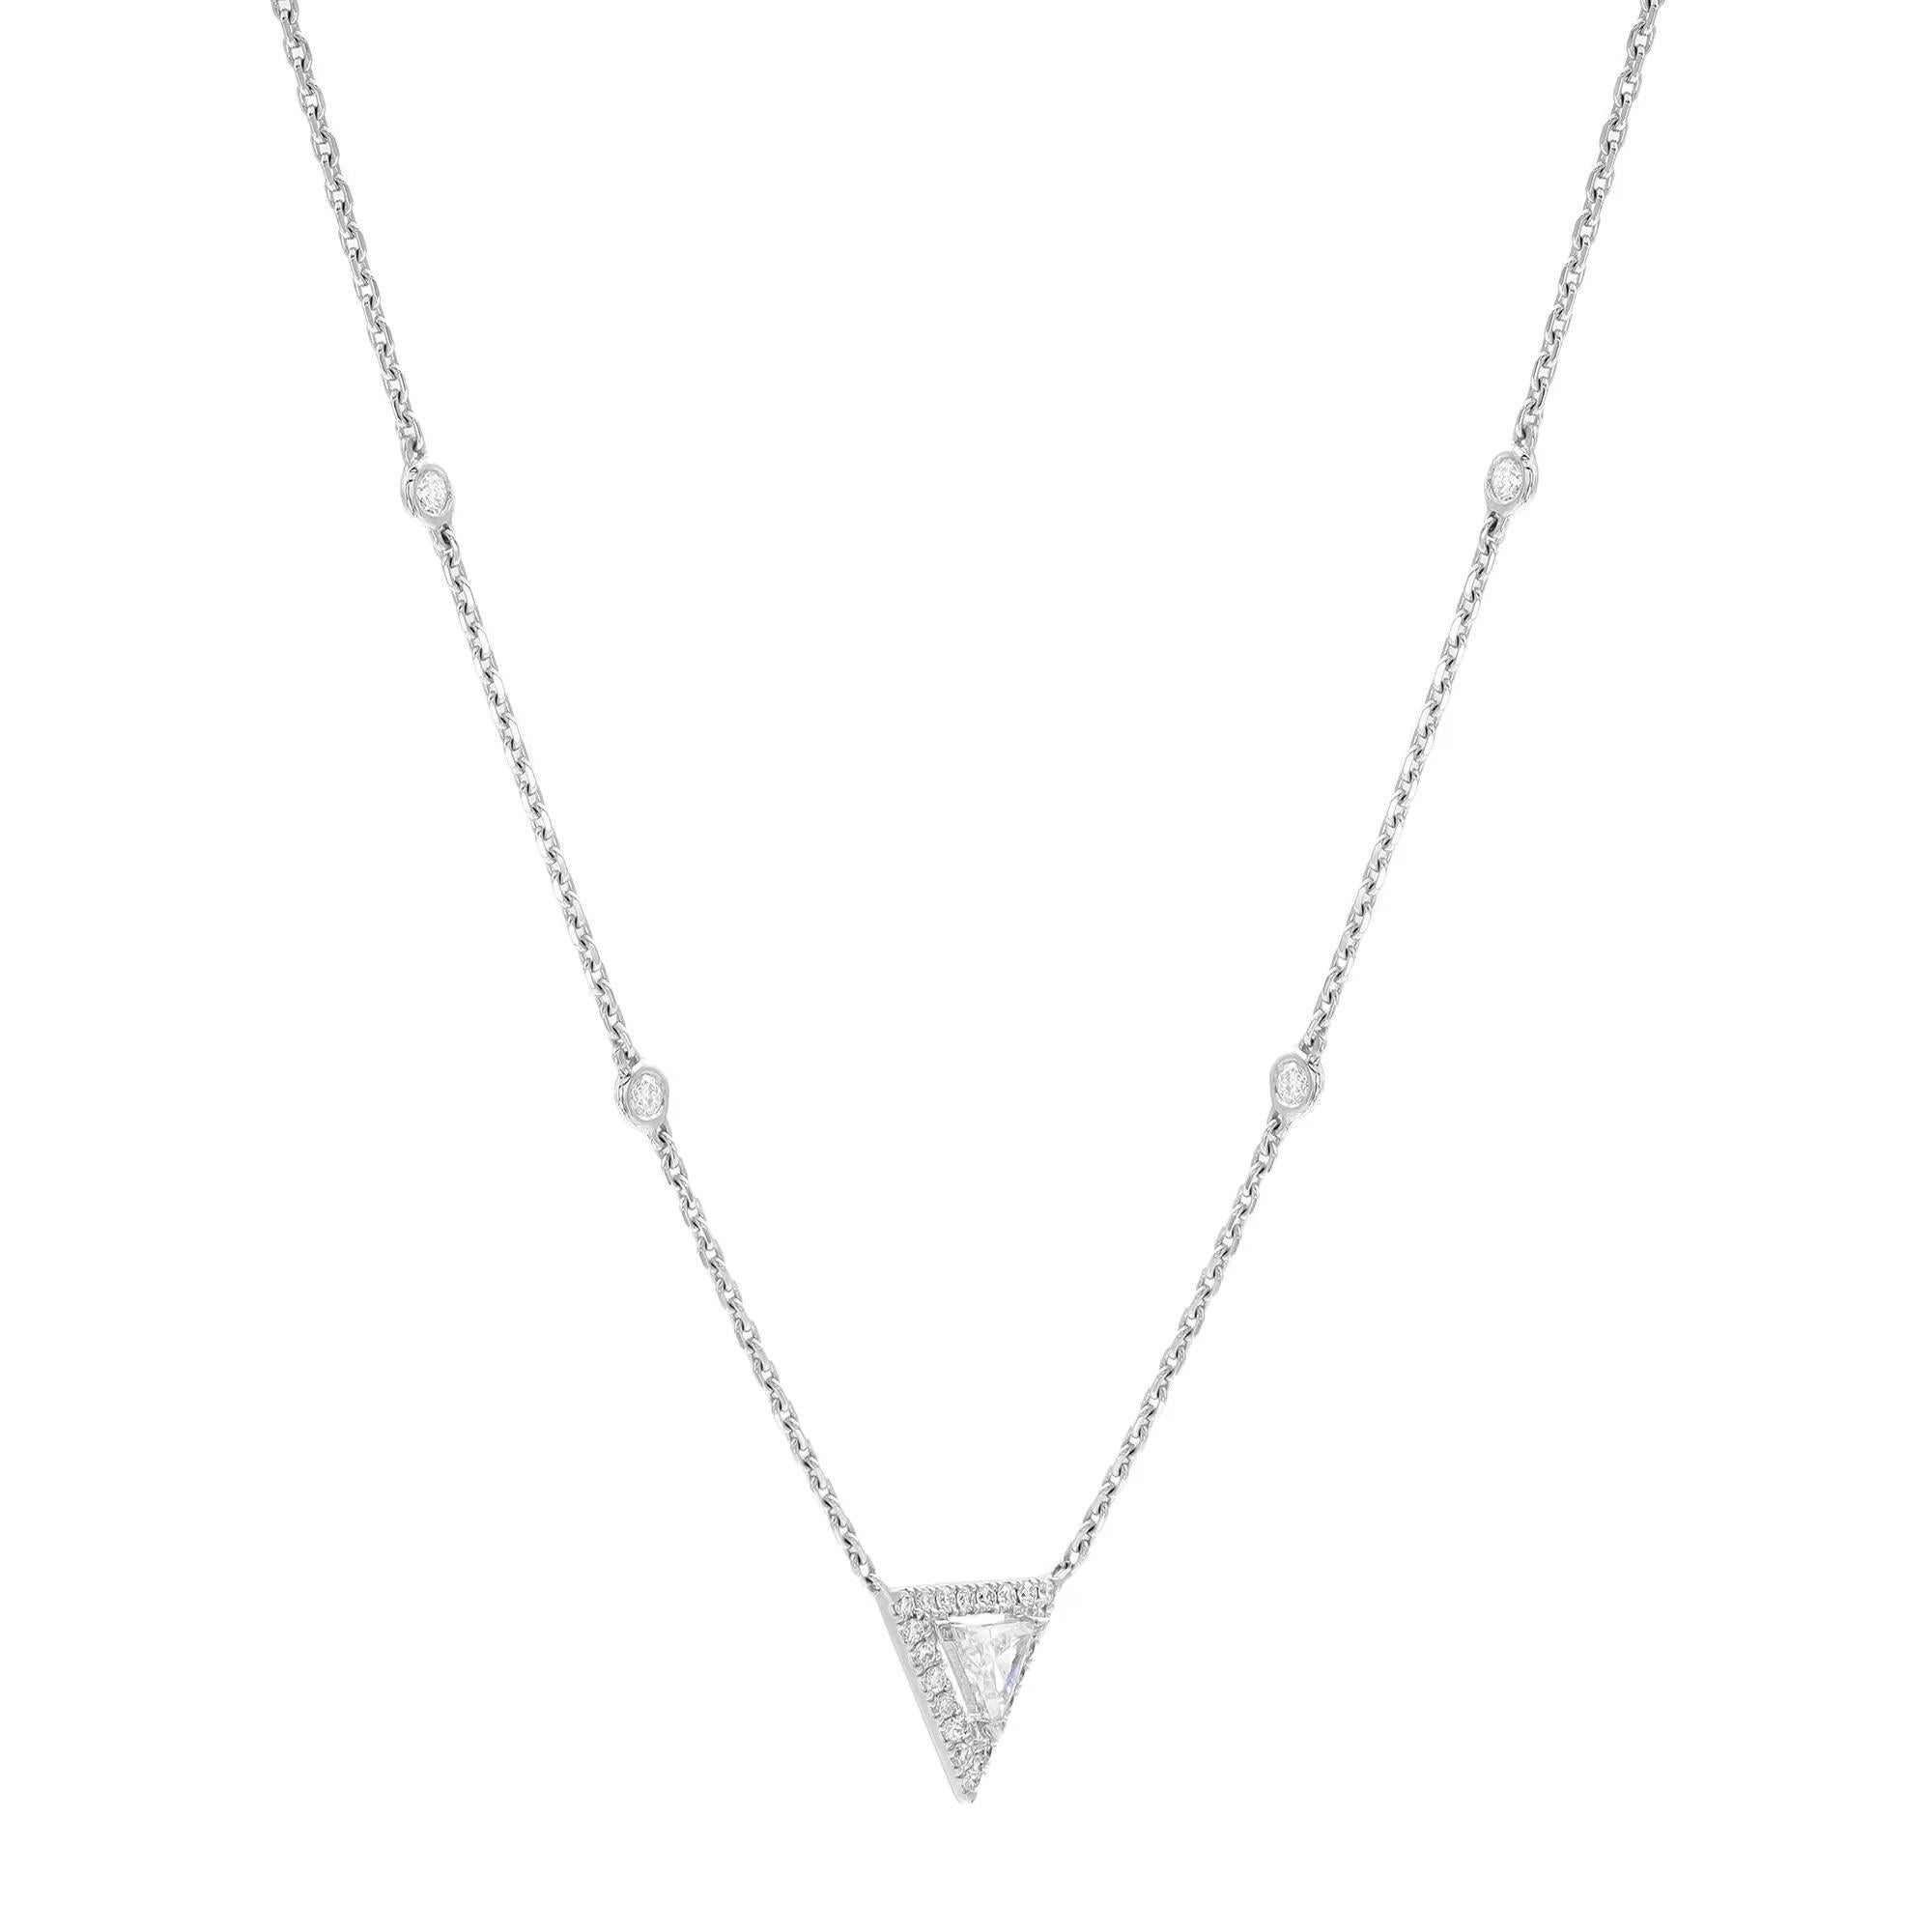 This stunning Messika Thea diamond pendant necklace adds sheer beauty and brilliance with a striking prong set triangular cut diamond in the center with a round cut diamond halo along with the diamond by the yard chain that further completes the